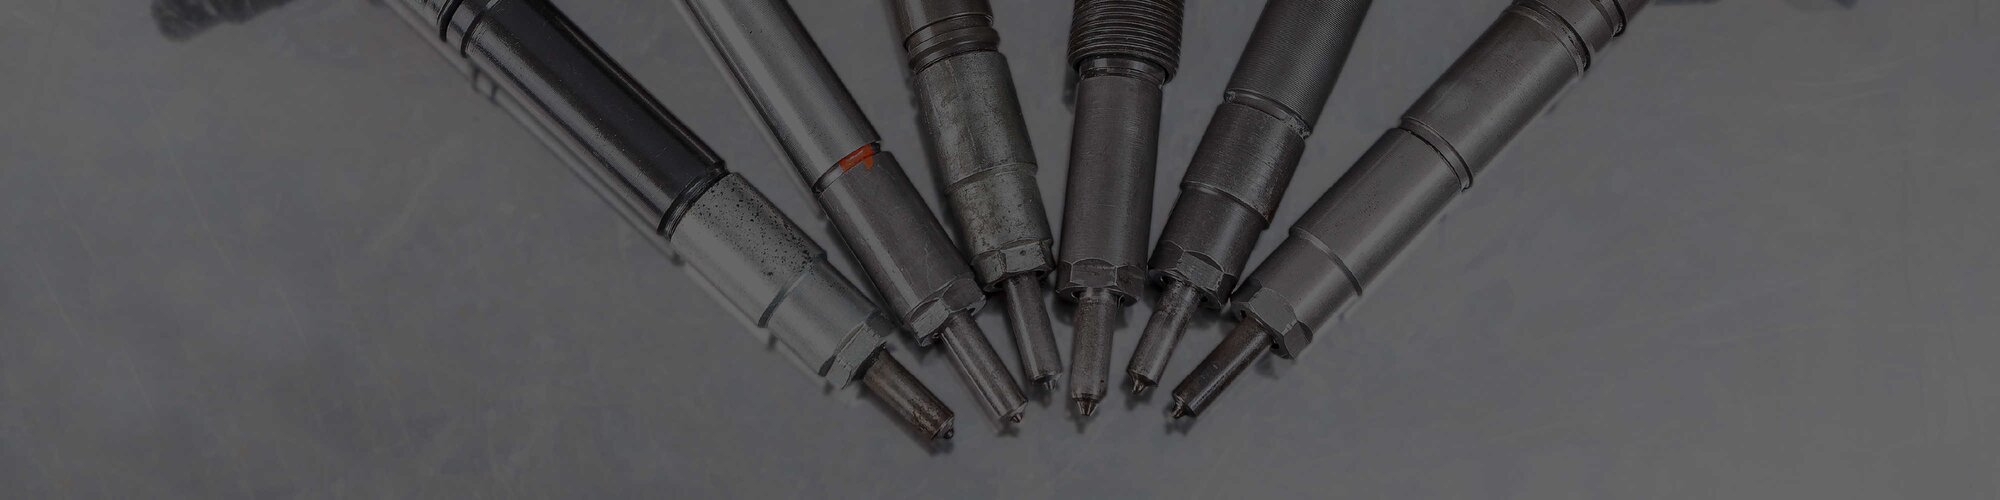 6 shiny diesel fuel injectors arranged in a semicircle